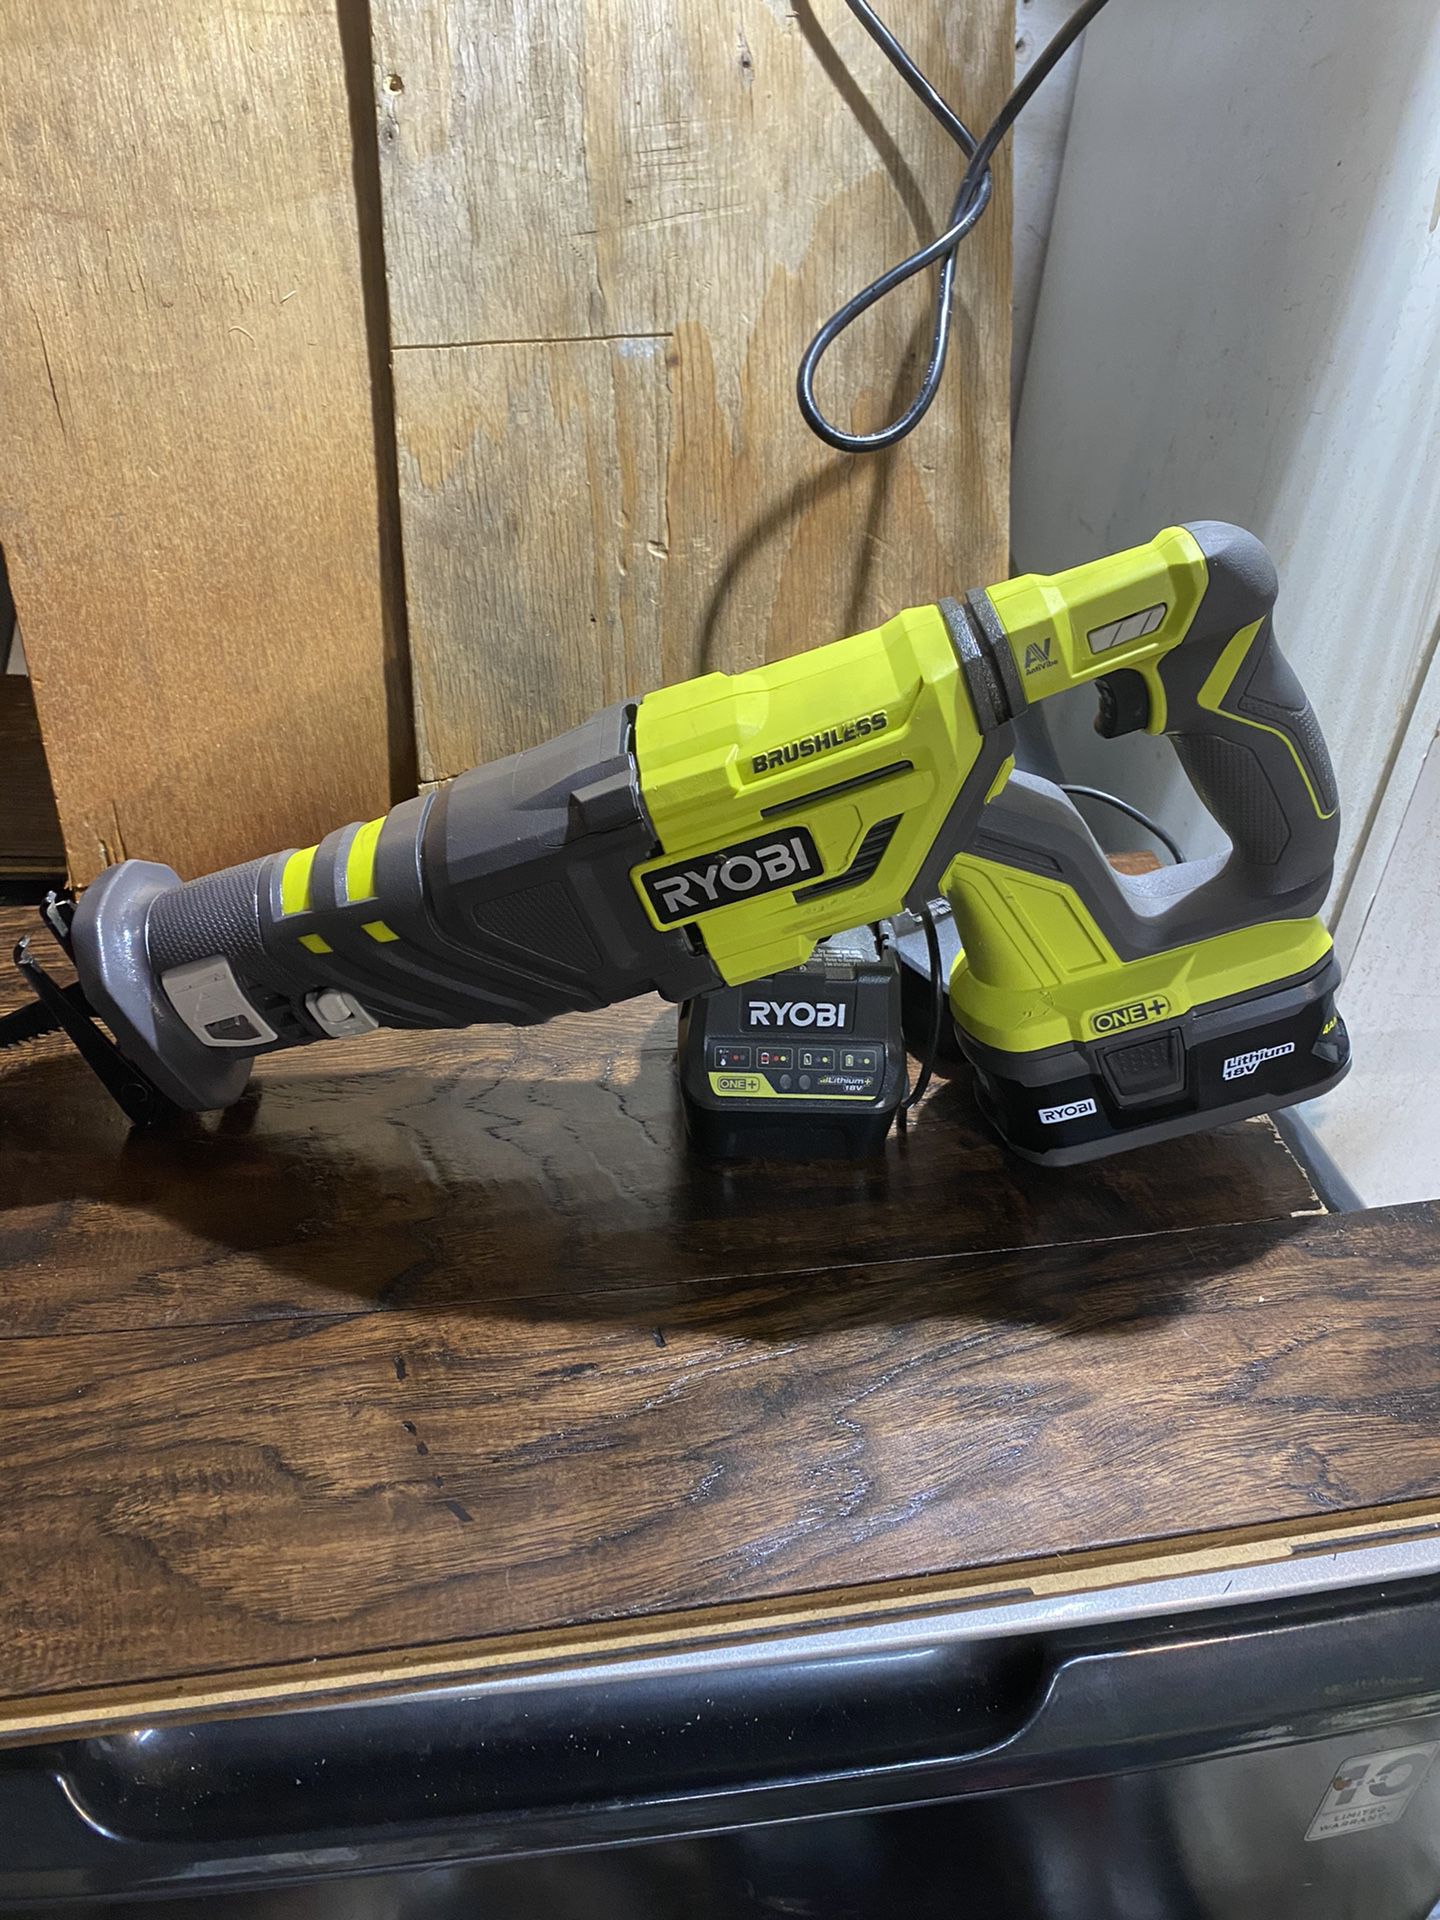 Ryobi 18 V cordless brushless reciprocating saw with 4.0 AH battery And charger